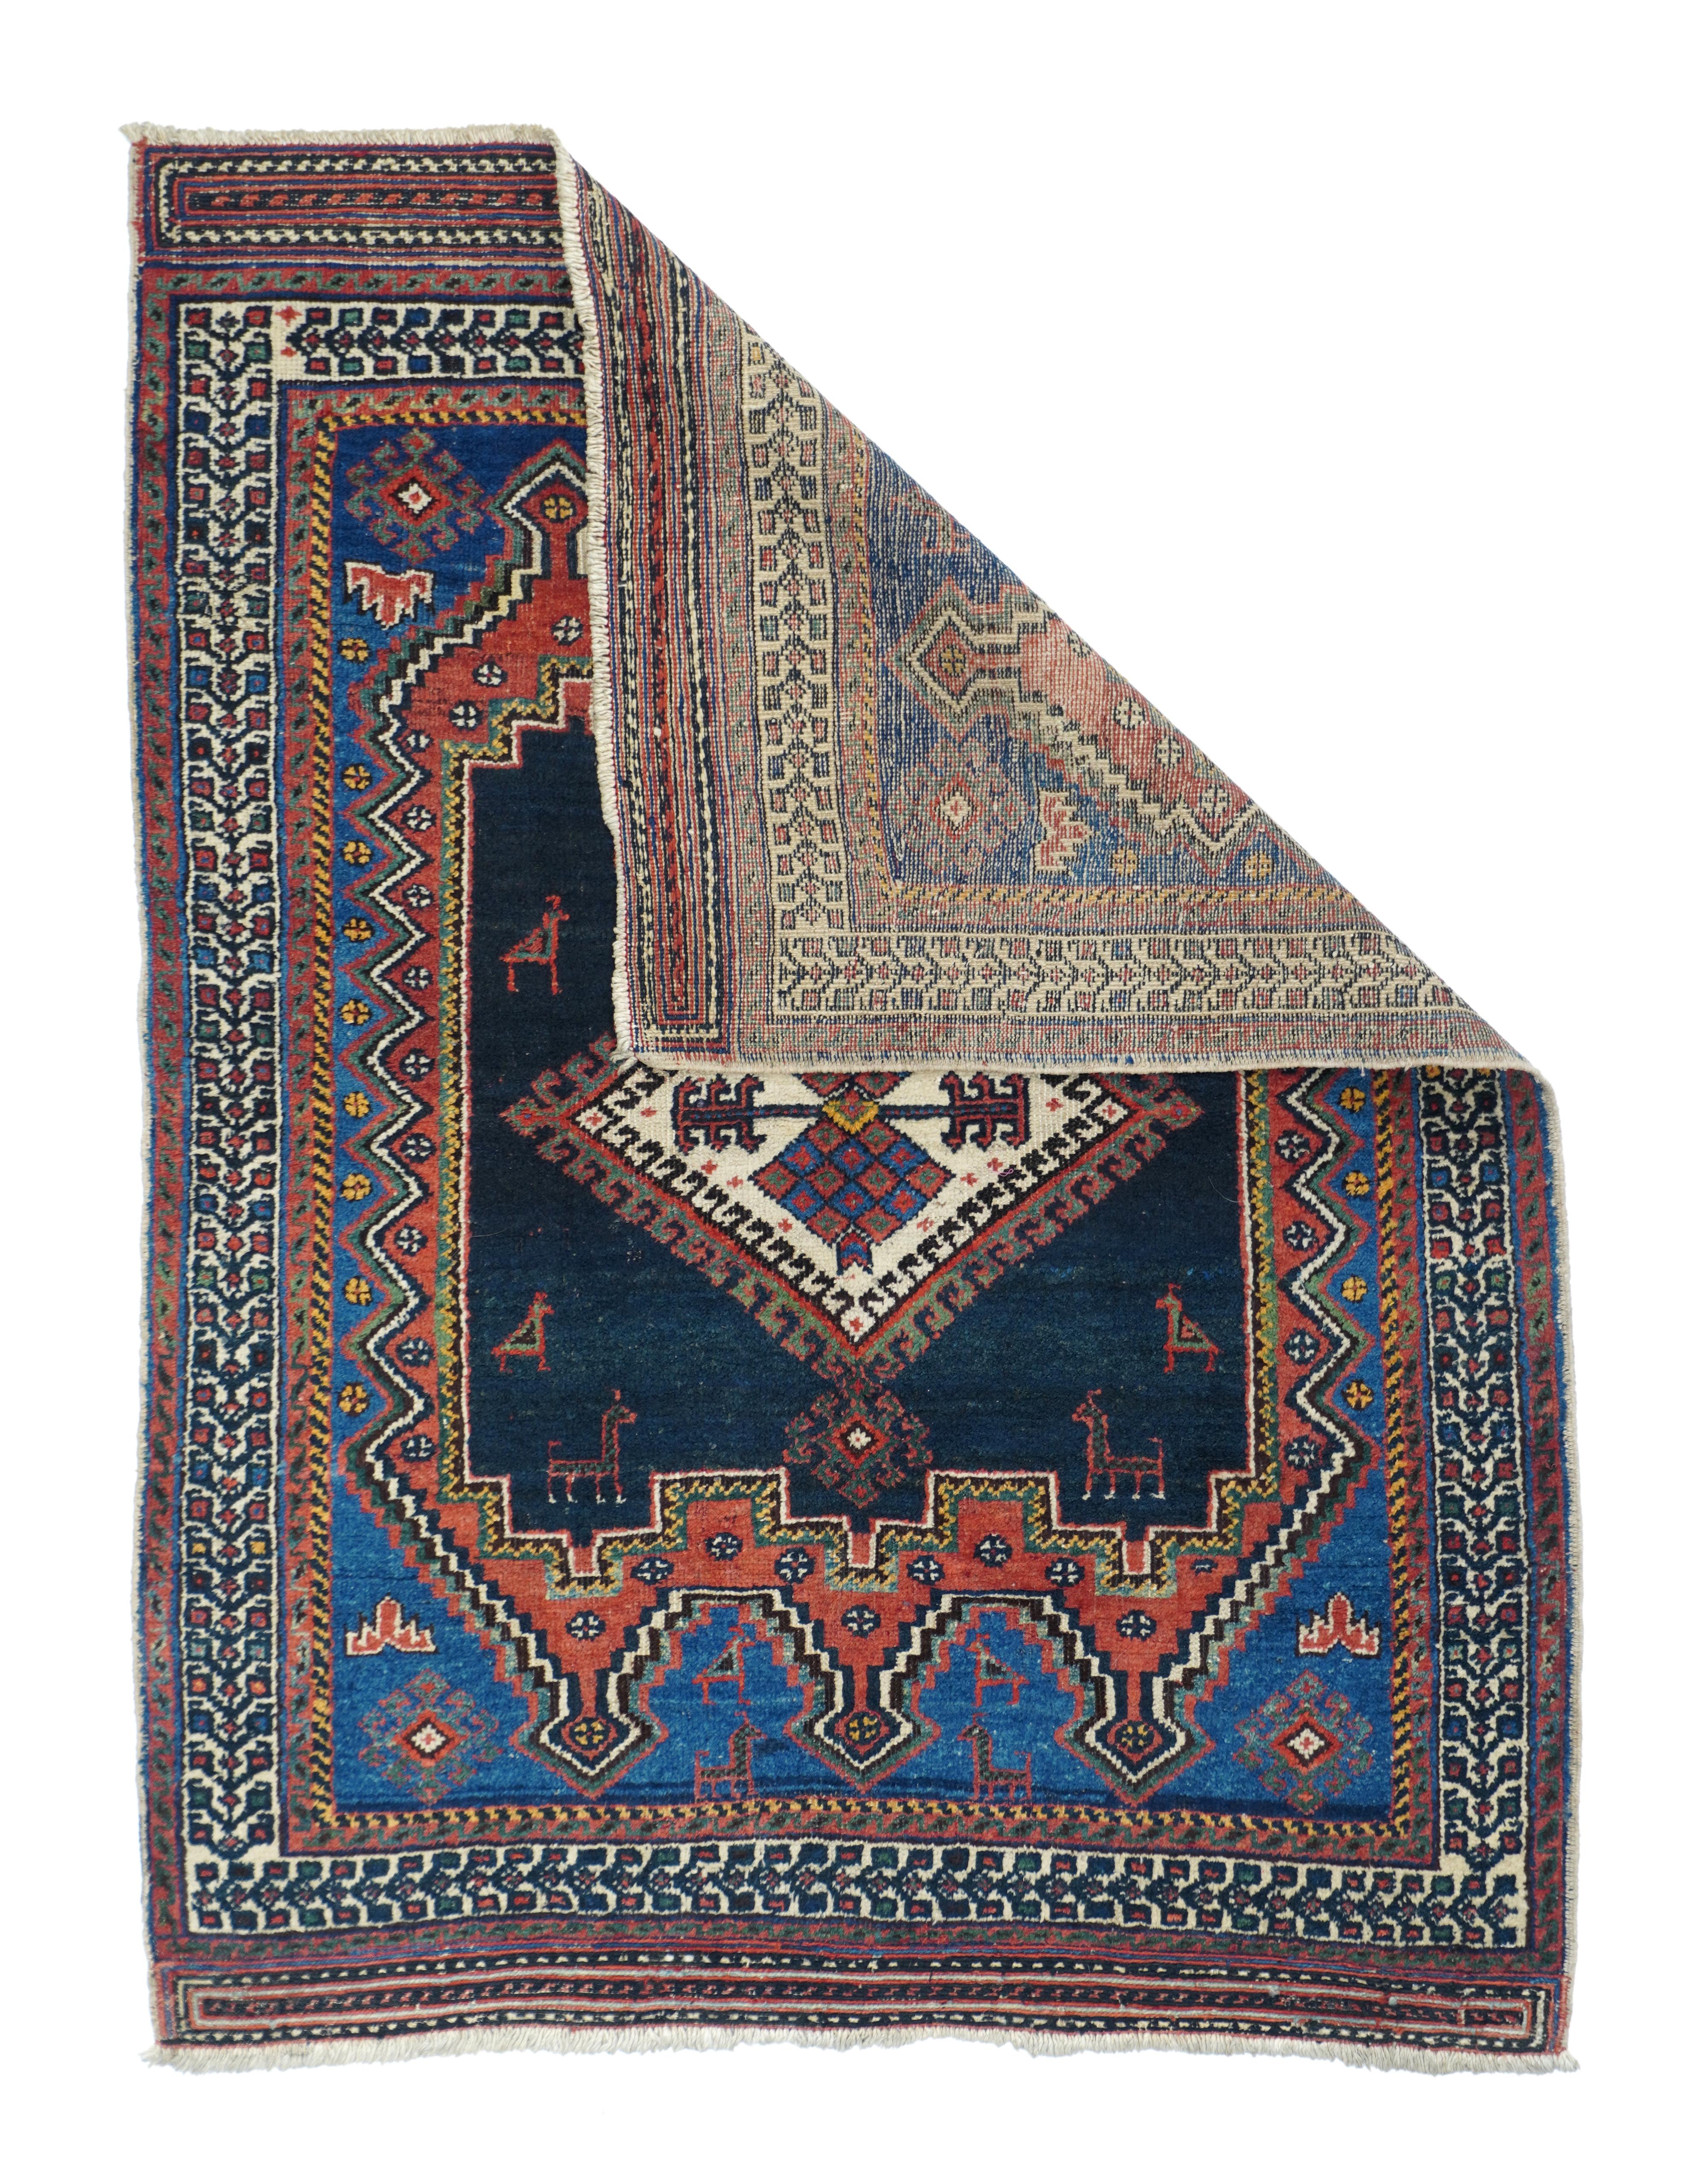 One of our many collectible SE Persian tribal Afshar rugs, this example features a cerulean blue field, centring a coral cartouche subfield with six finial points, and further enclosing a conforming navy panel with a hooked, lozenge focused. Animals